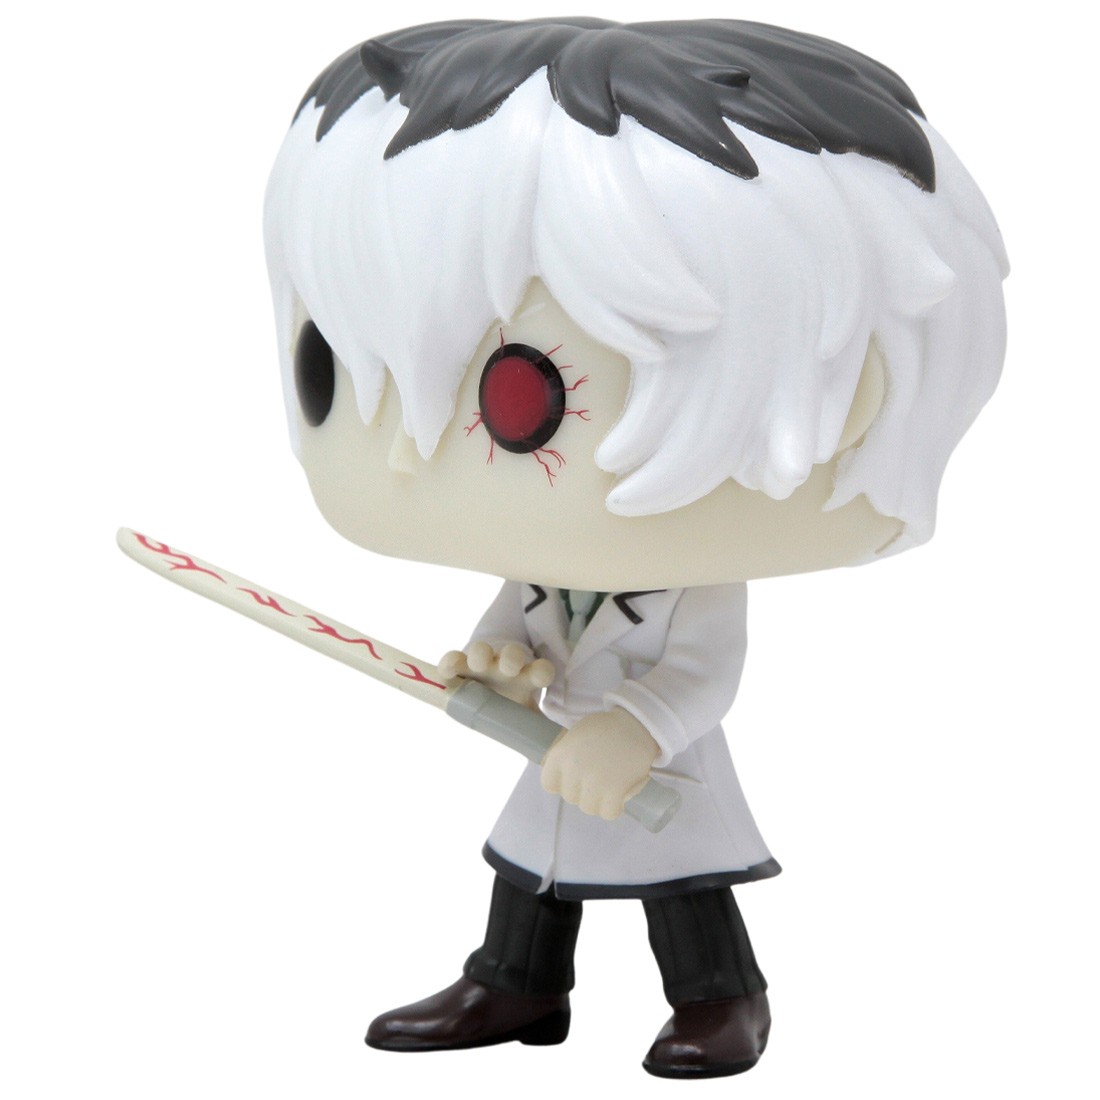 Tokyo Ghoul POP! Animation Vinyl Figure Haise Sasaki in White Outfit 9 cm